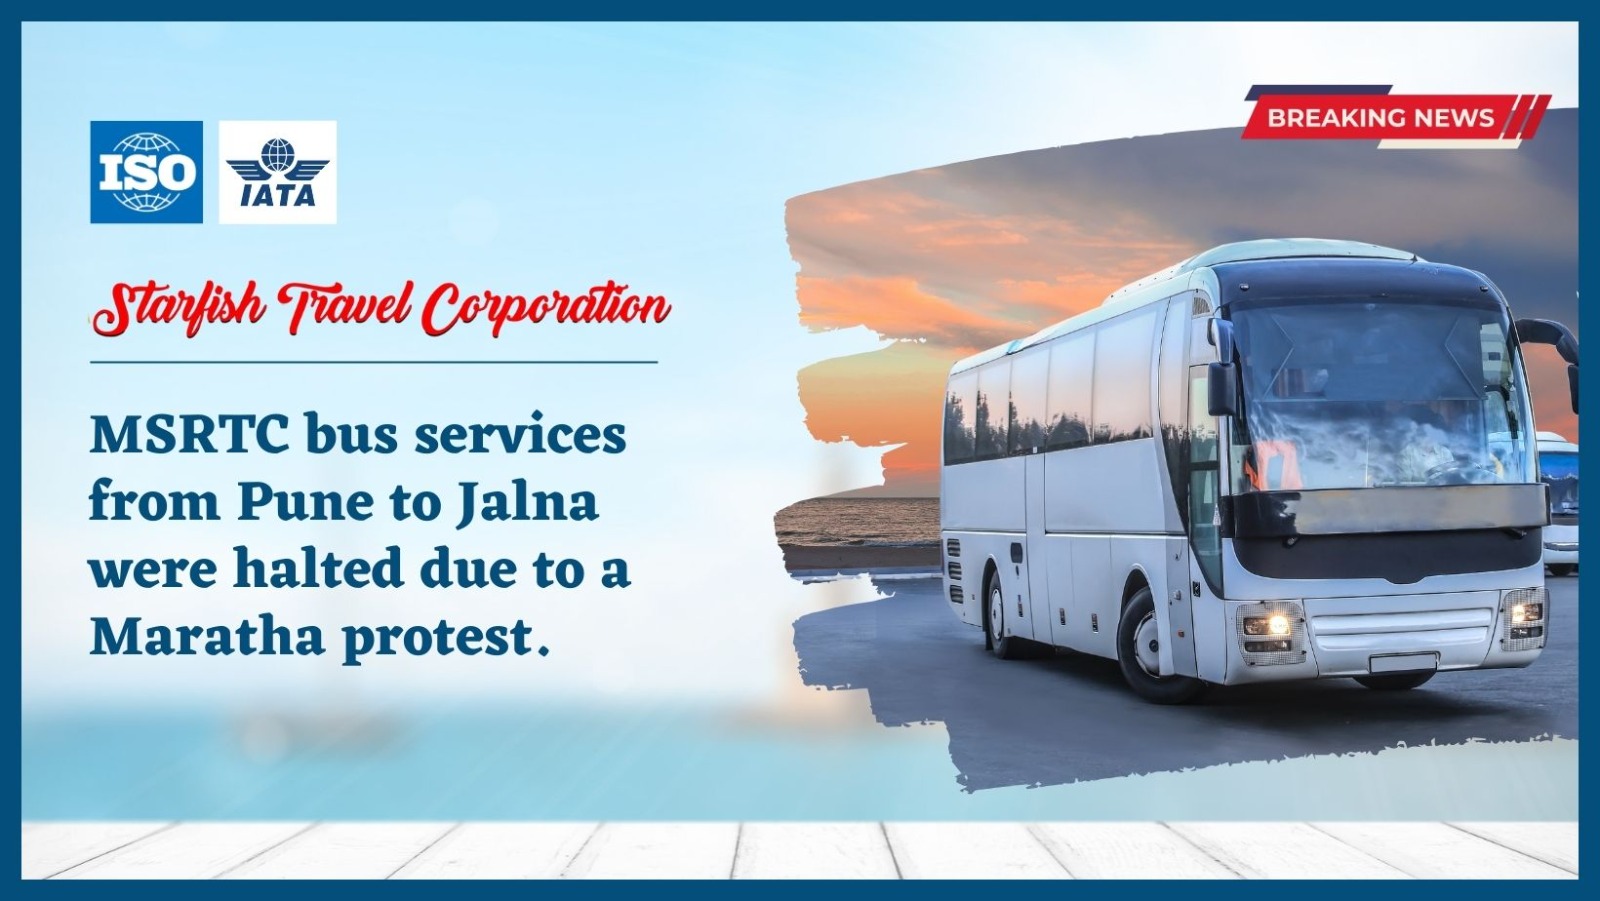 MSRTC bus services from Pune to Jalna were halted due to a Maratha protest.